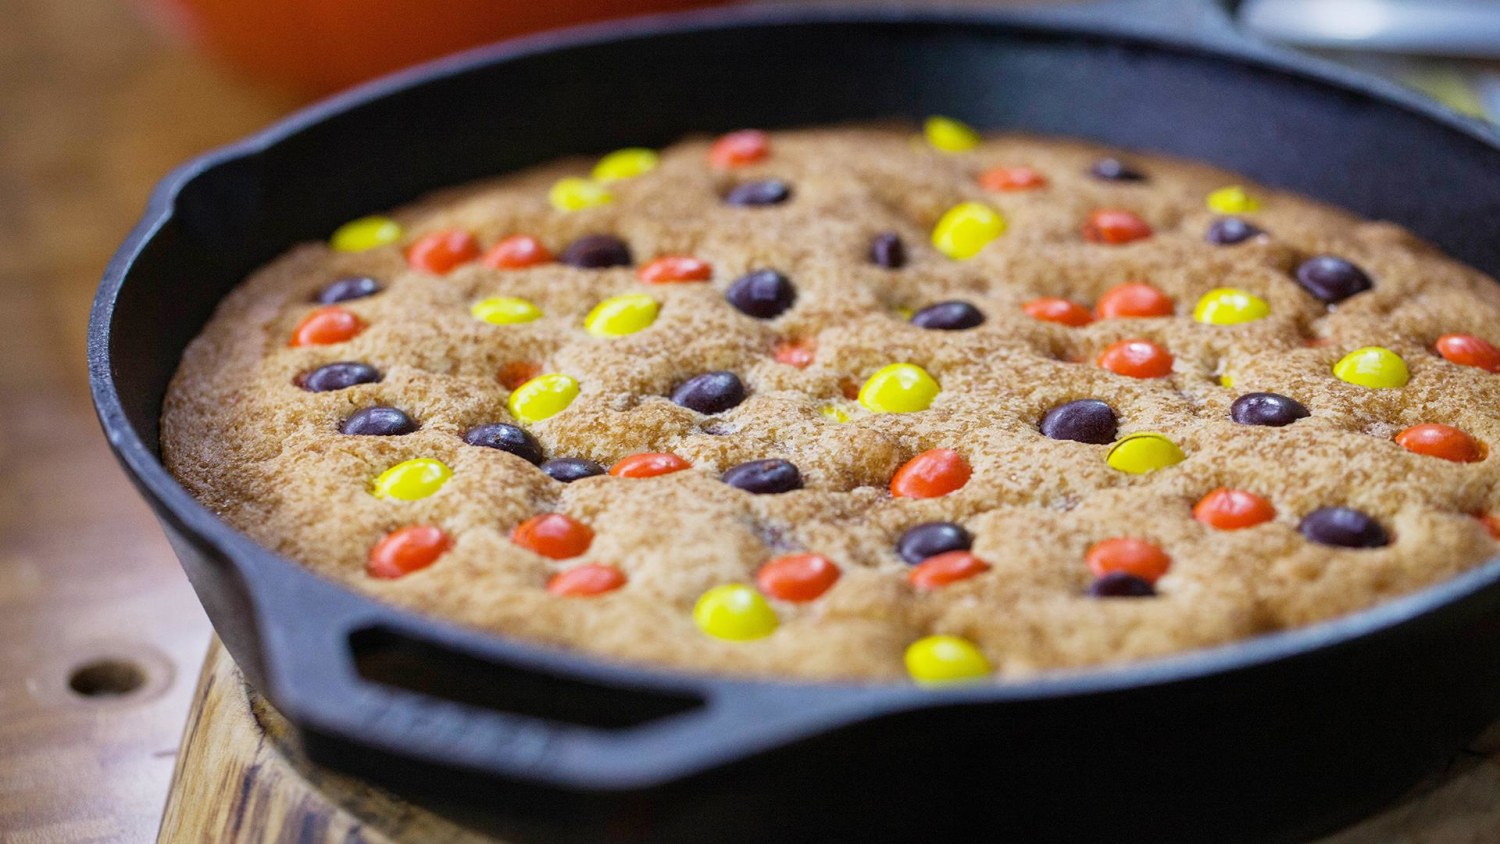 This M&M's Cookie-Baking Kit Comes With a Skillet for the Best $6